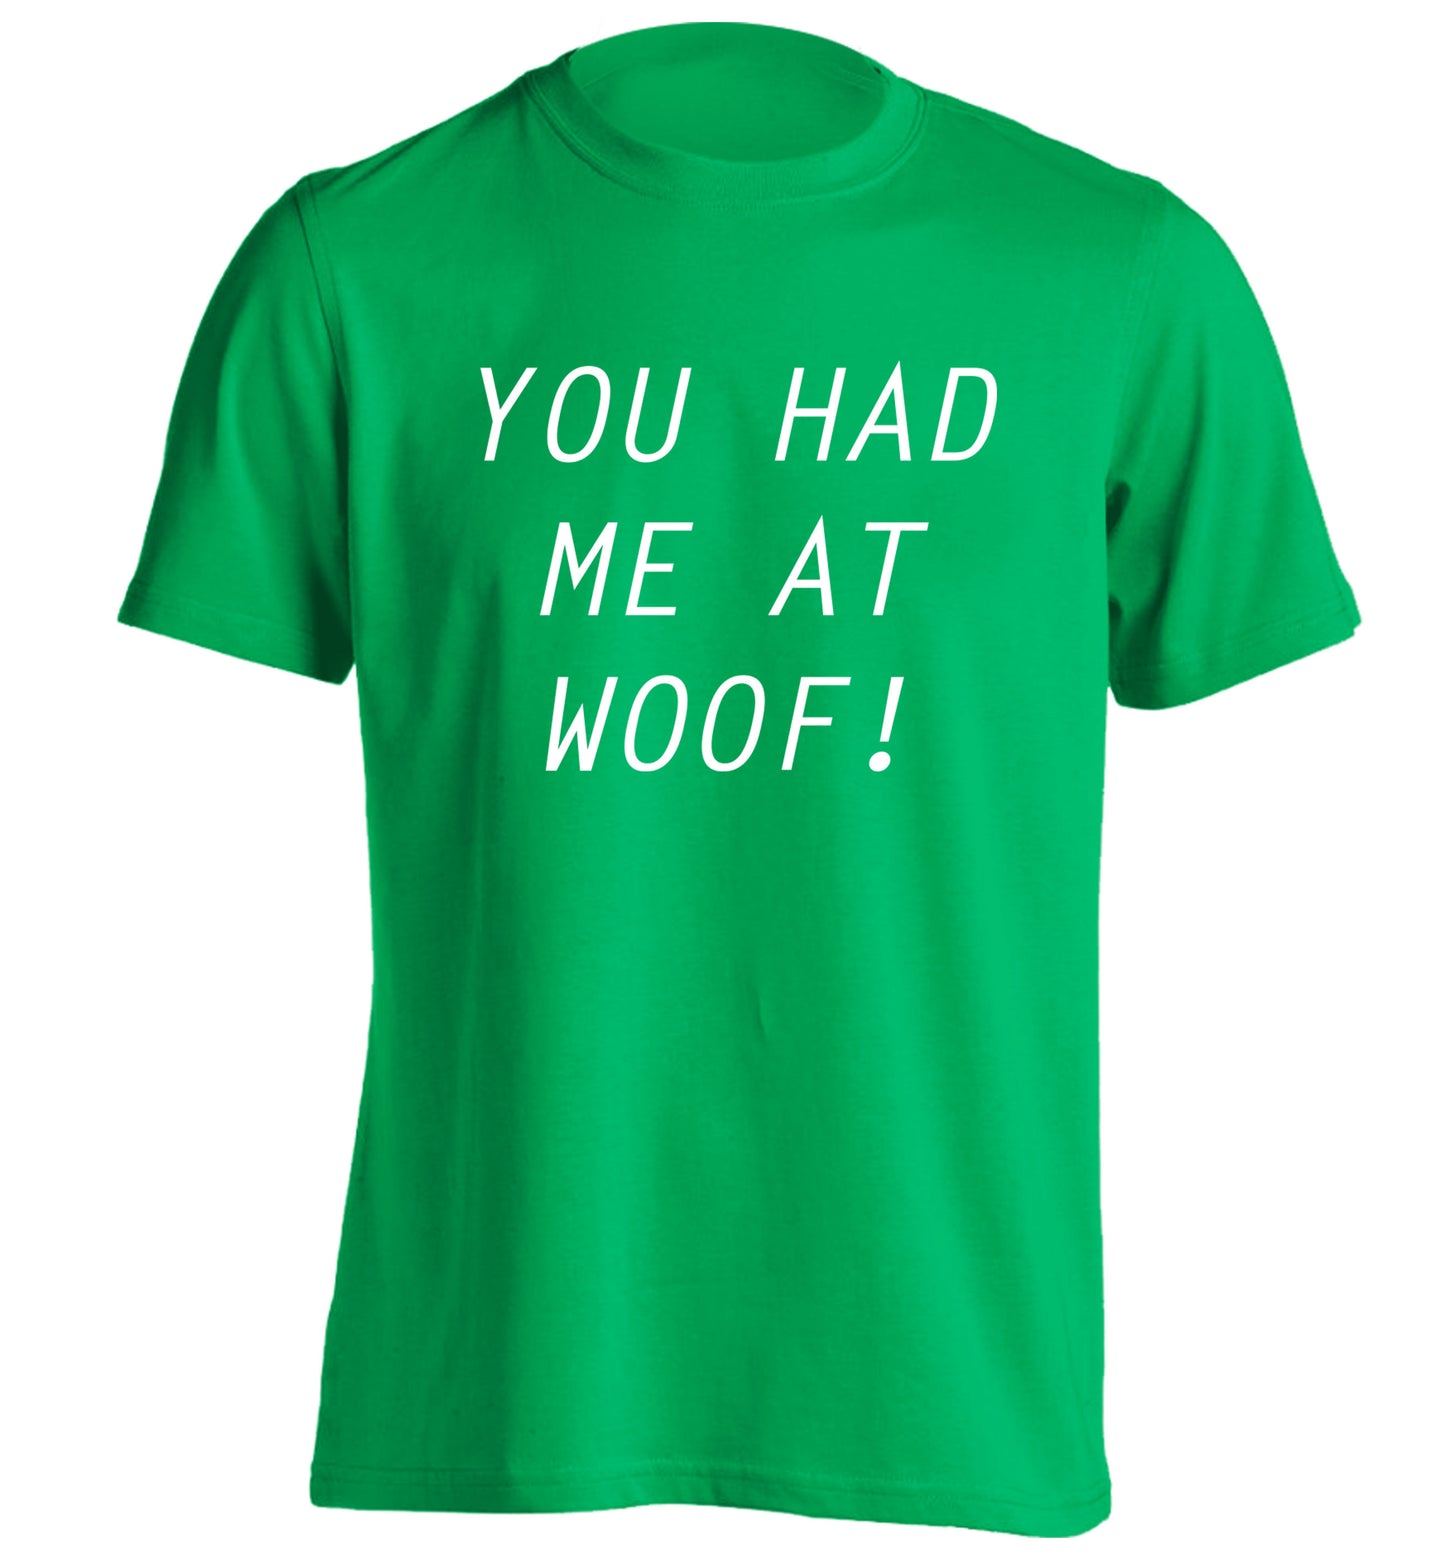 You had me at woof adults unisex green Tshirt 2XL